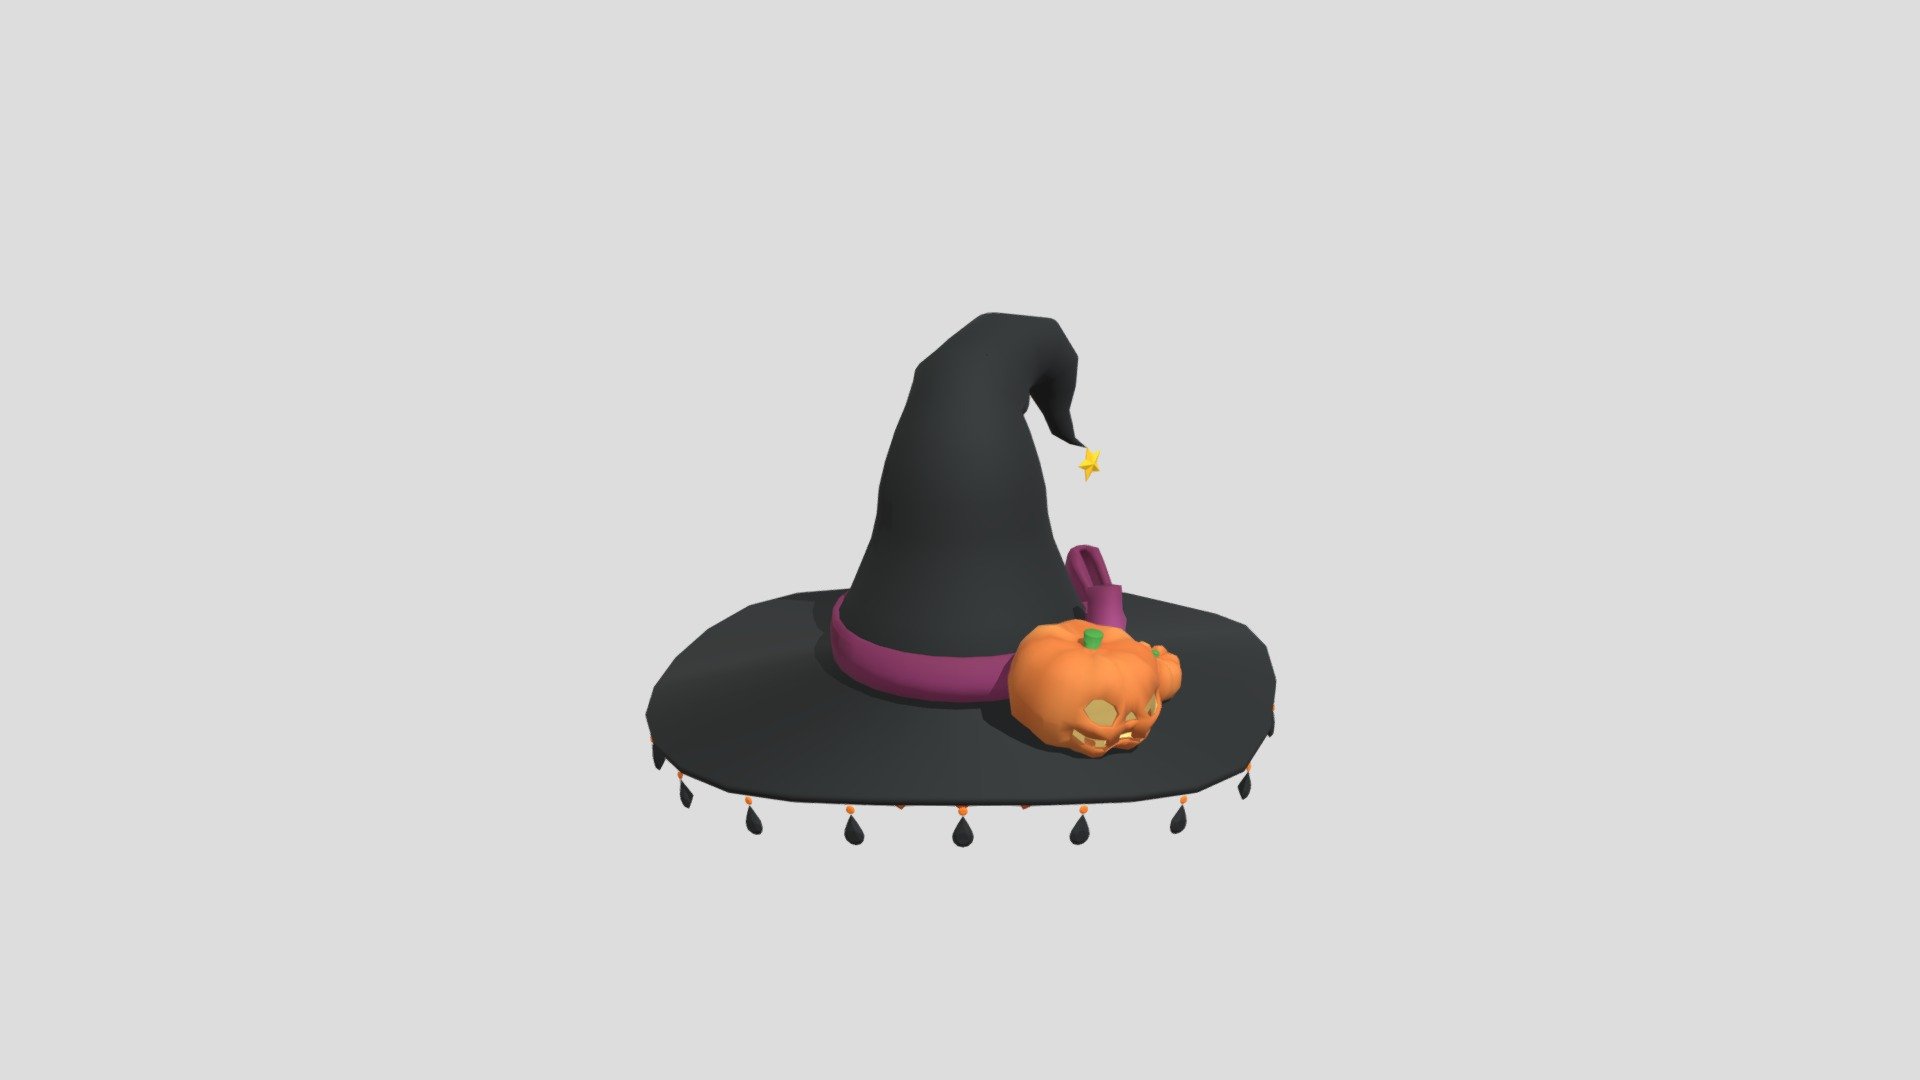 A Halloween witch hat.
Decorations such as pumpkins can be removed.
For Halloween props 3d model